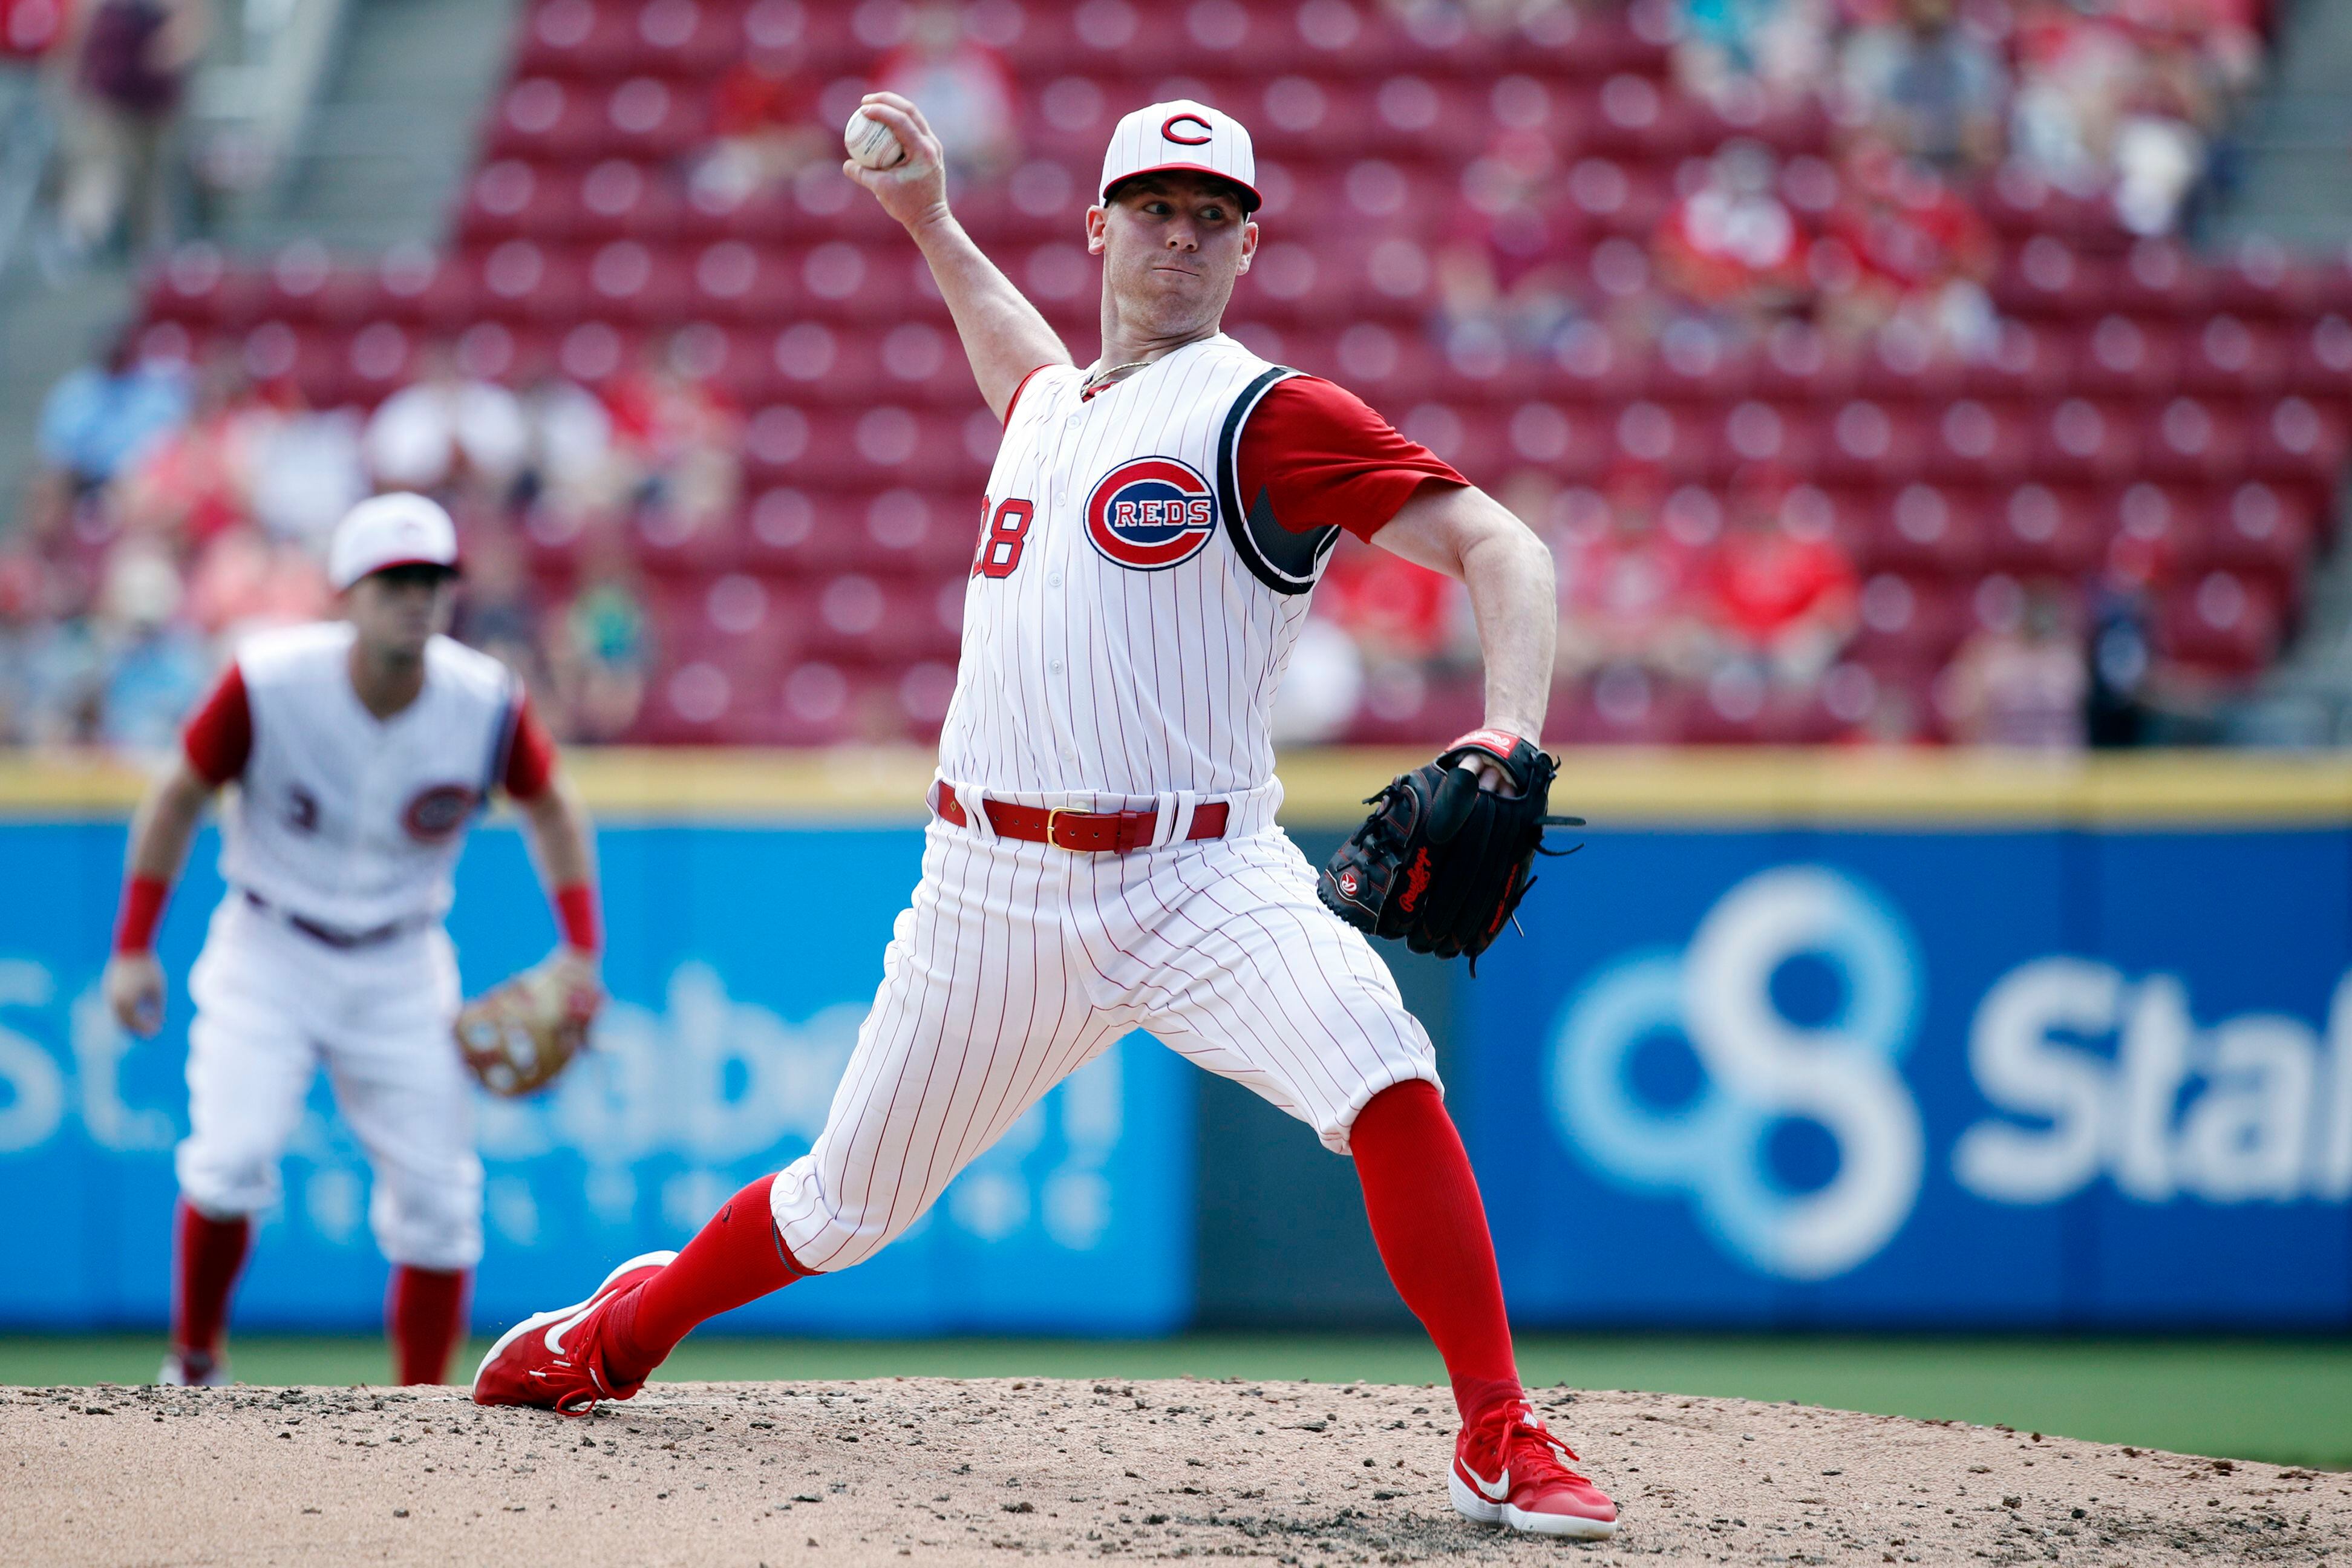 Reds play in sleeveless throwback uniforms against St. Louis Cardinals